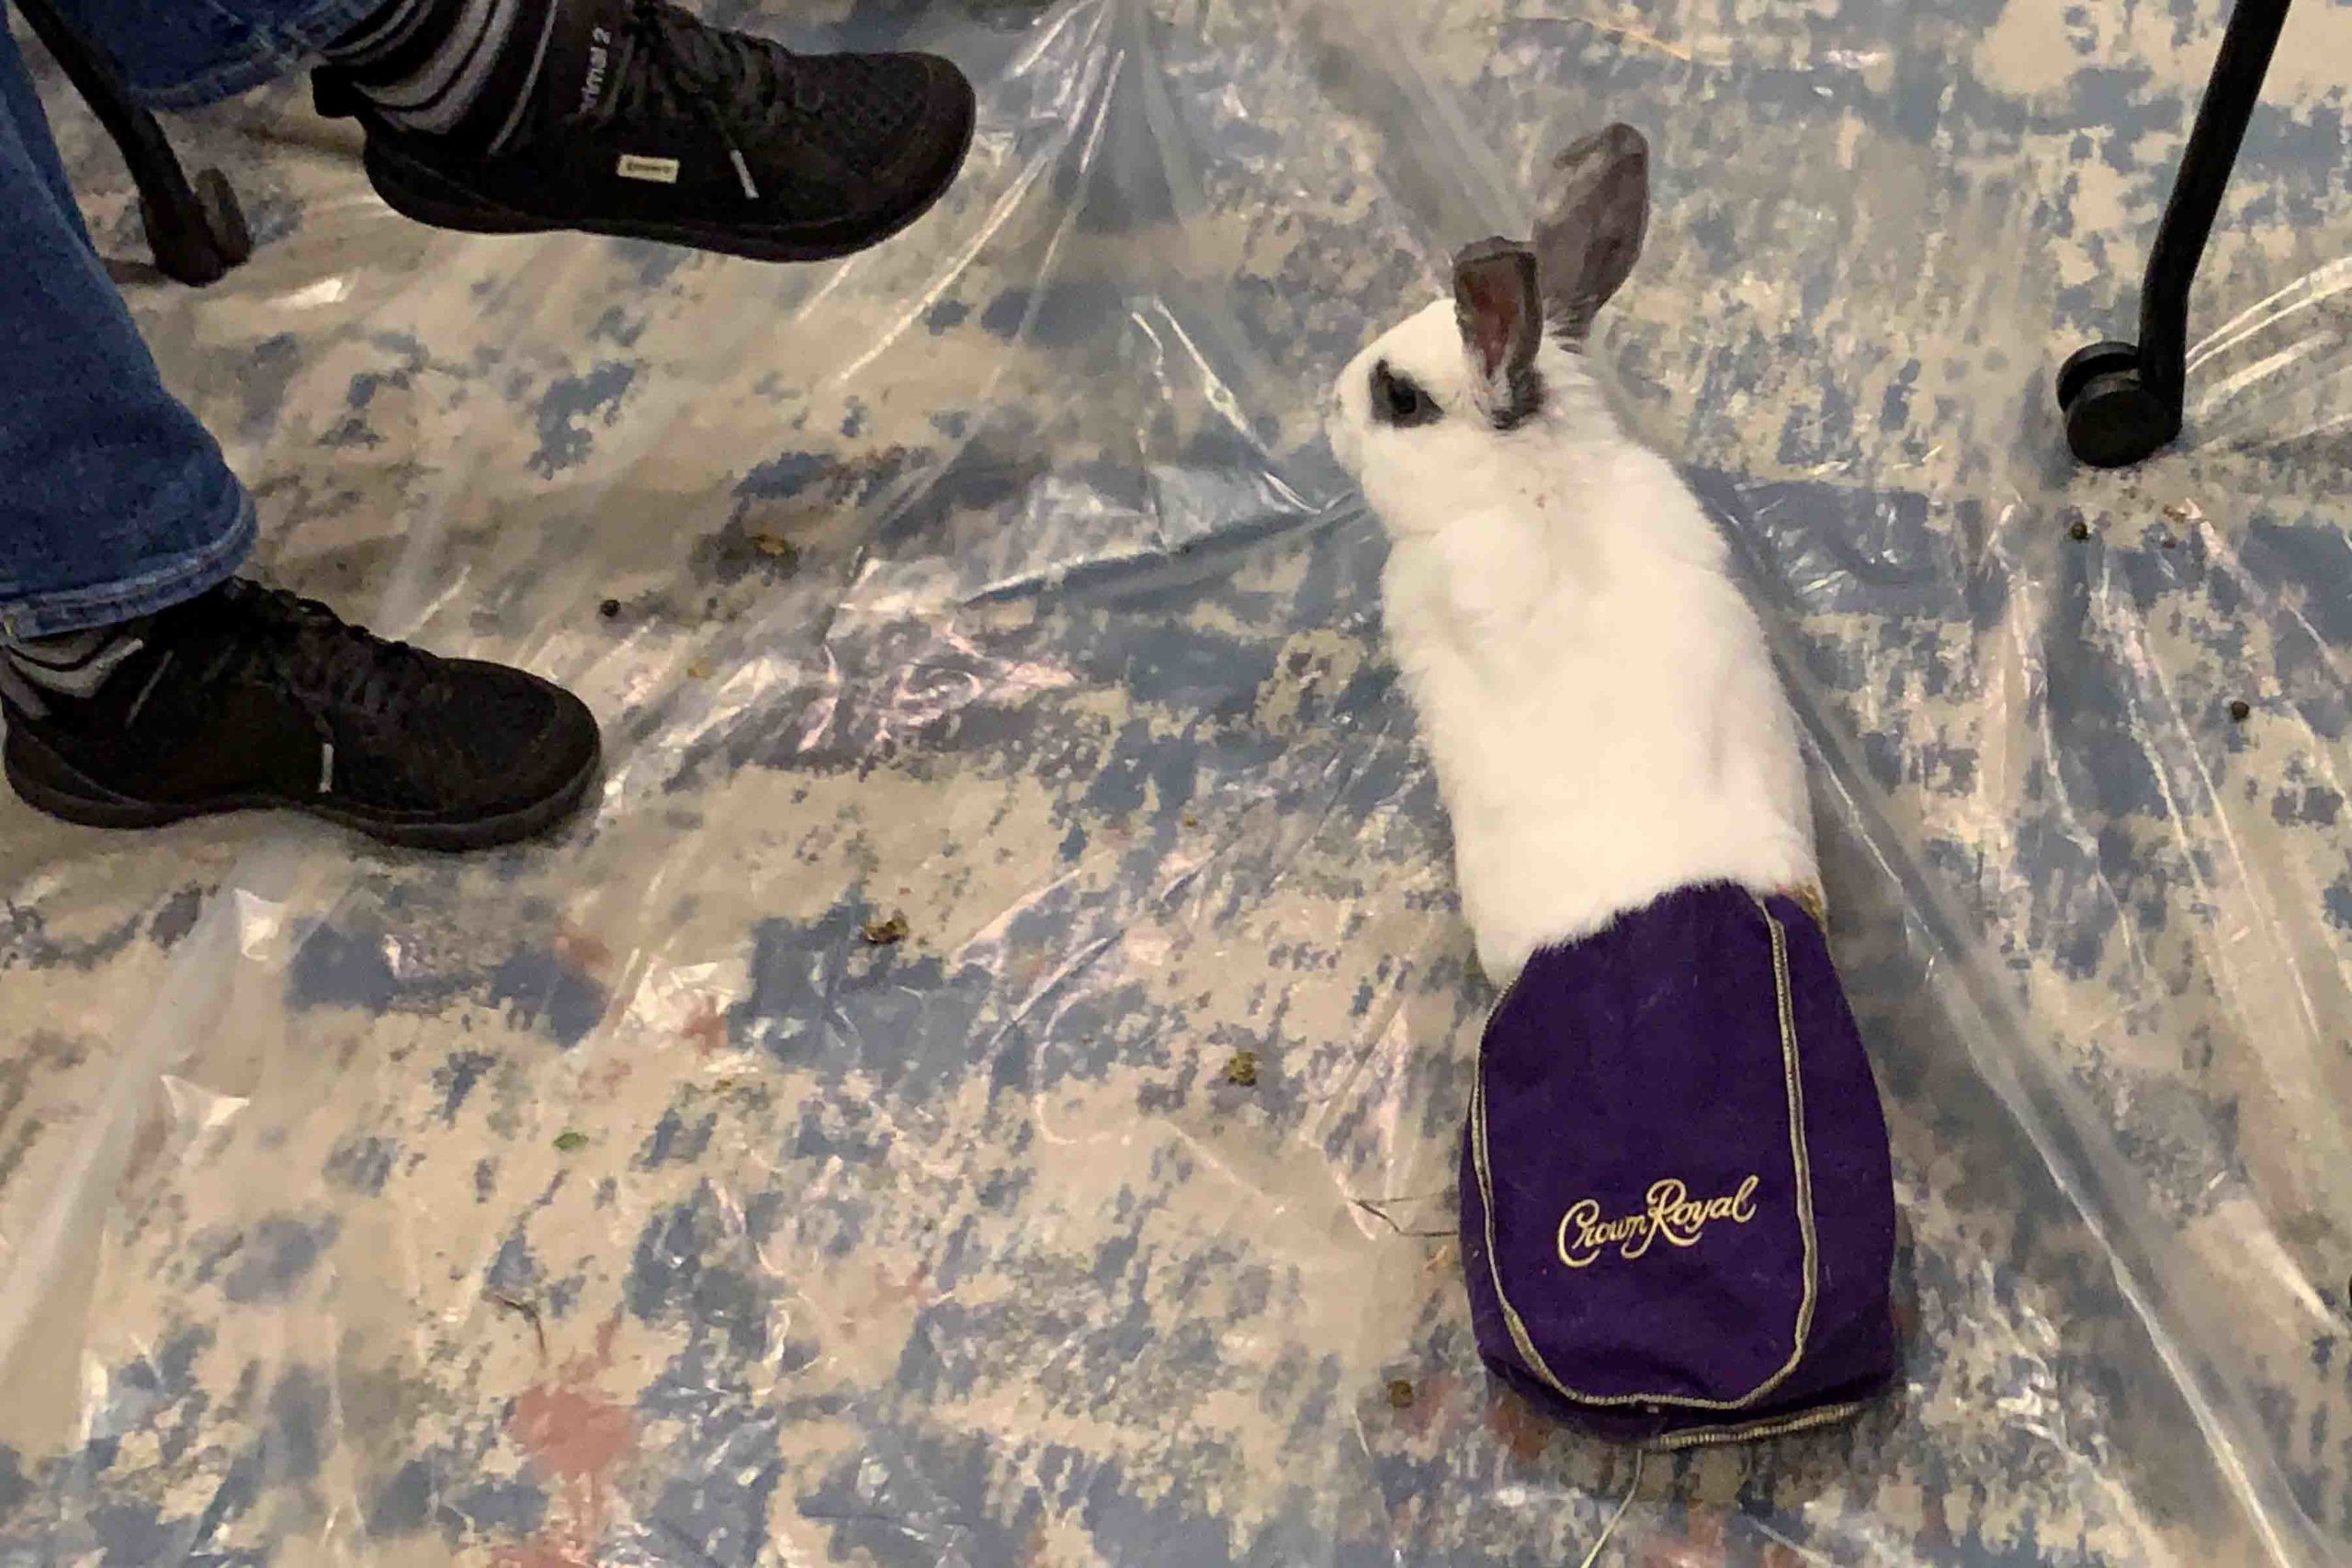 Jack In The Bag can zip across the floor as fast as any bunny. Being disabled doesn't slow him down.